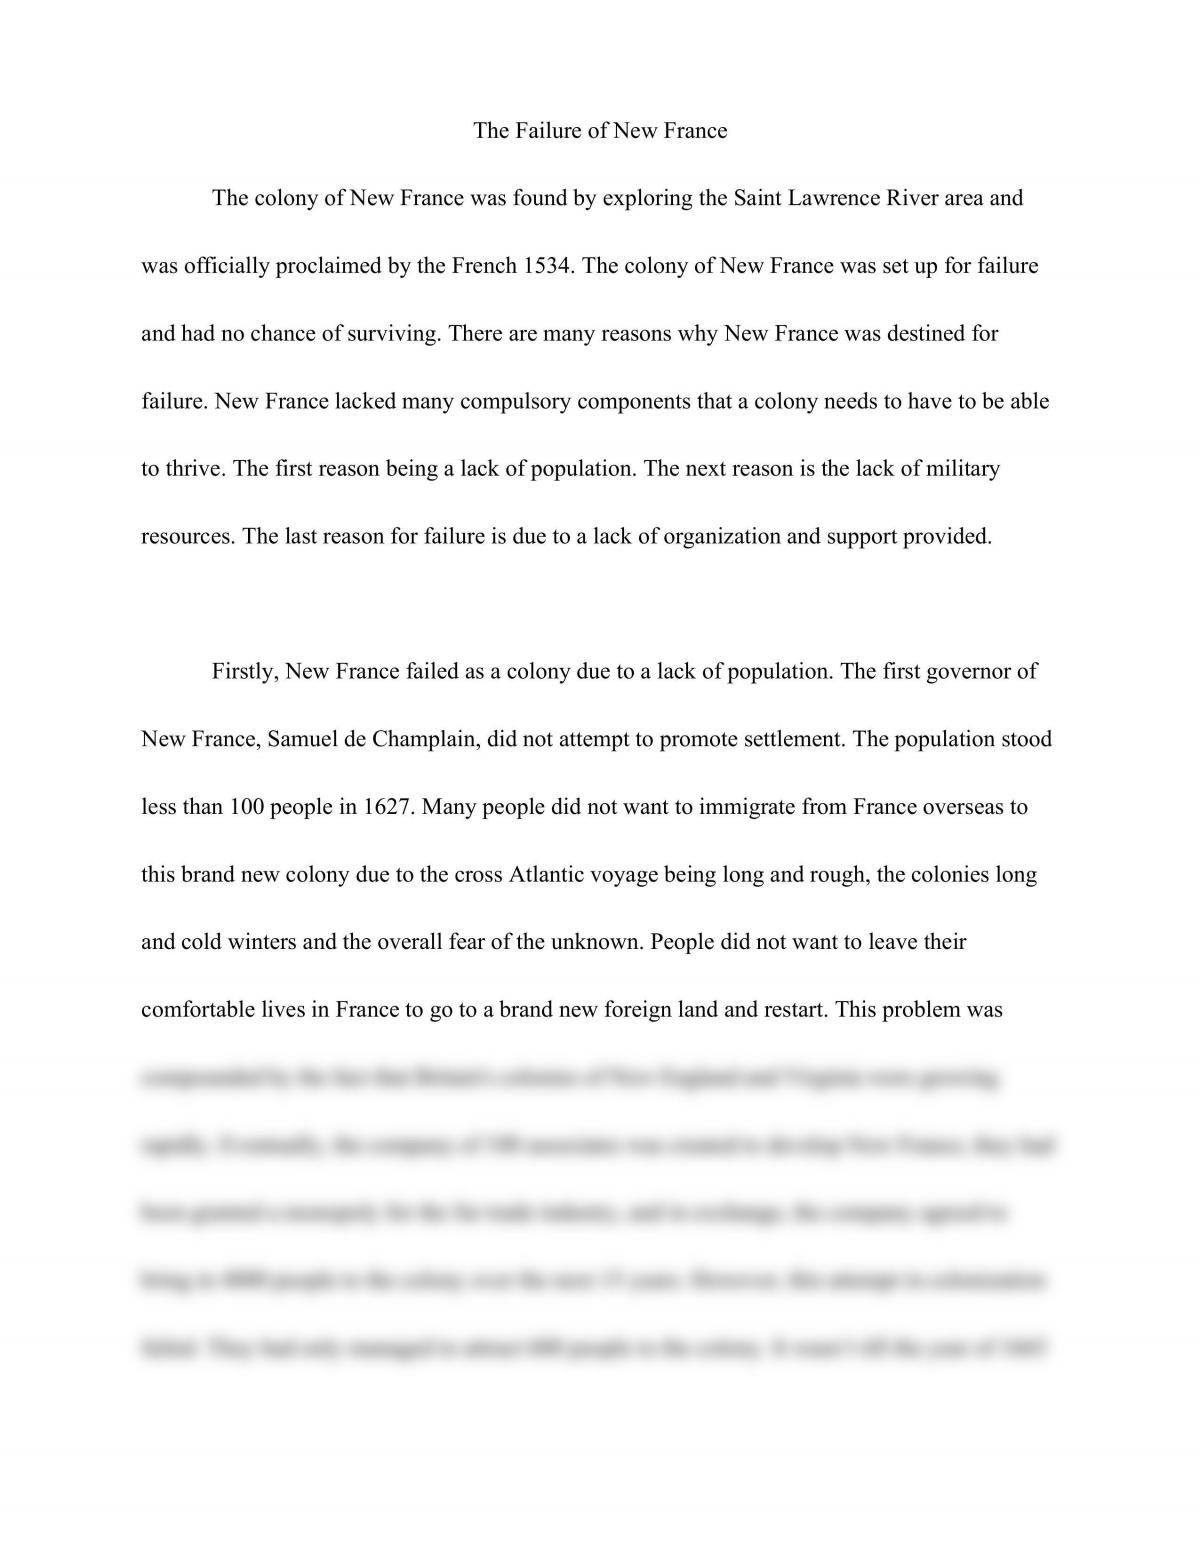 The Failure of New France Essay - Page 1